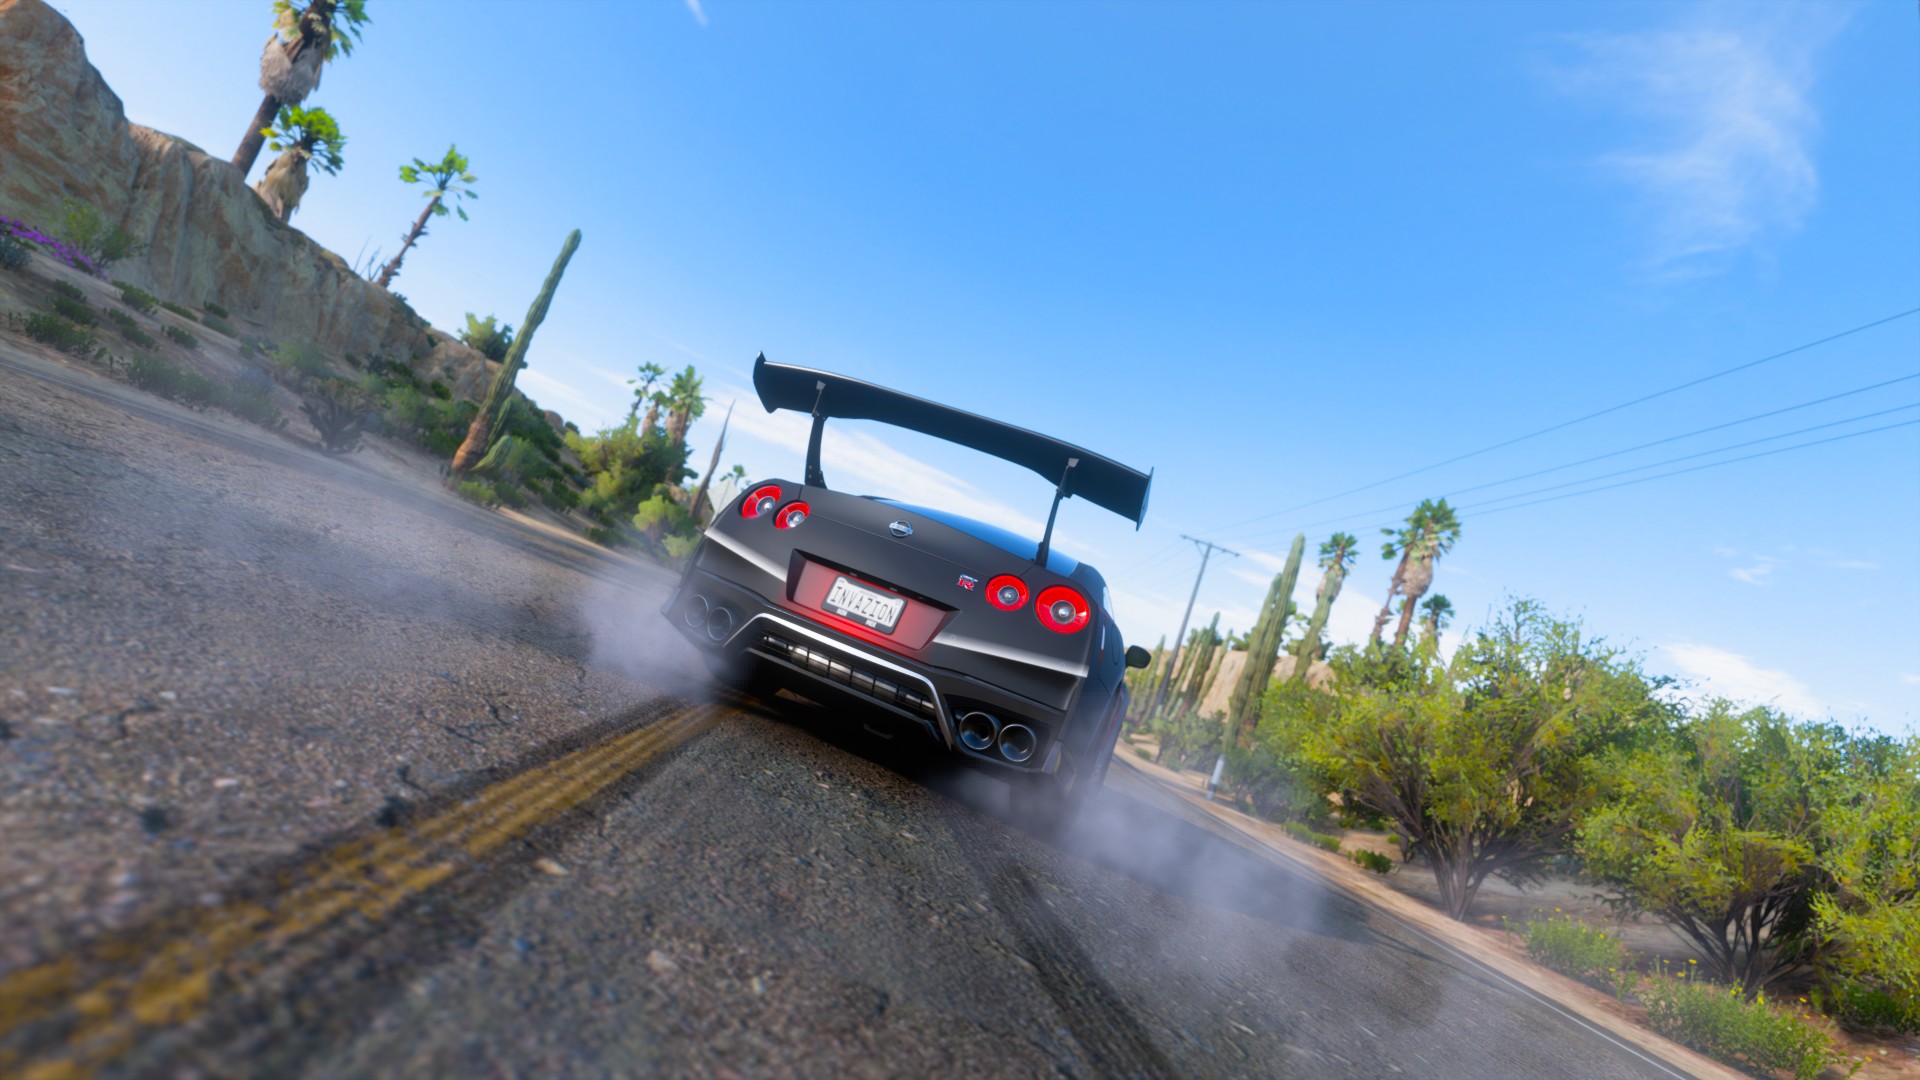 Forza Horizon 5: How to gain unlimited skill points with Barrel Rolls